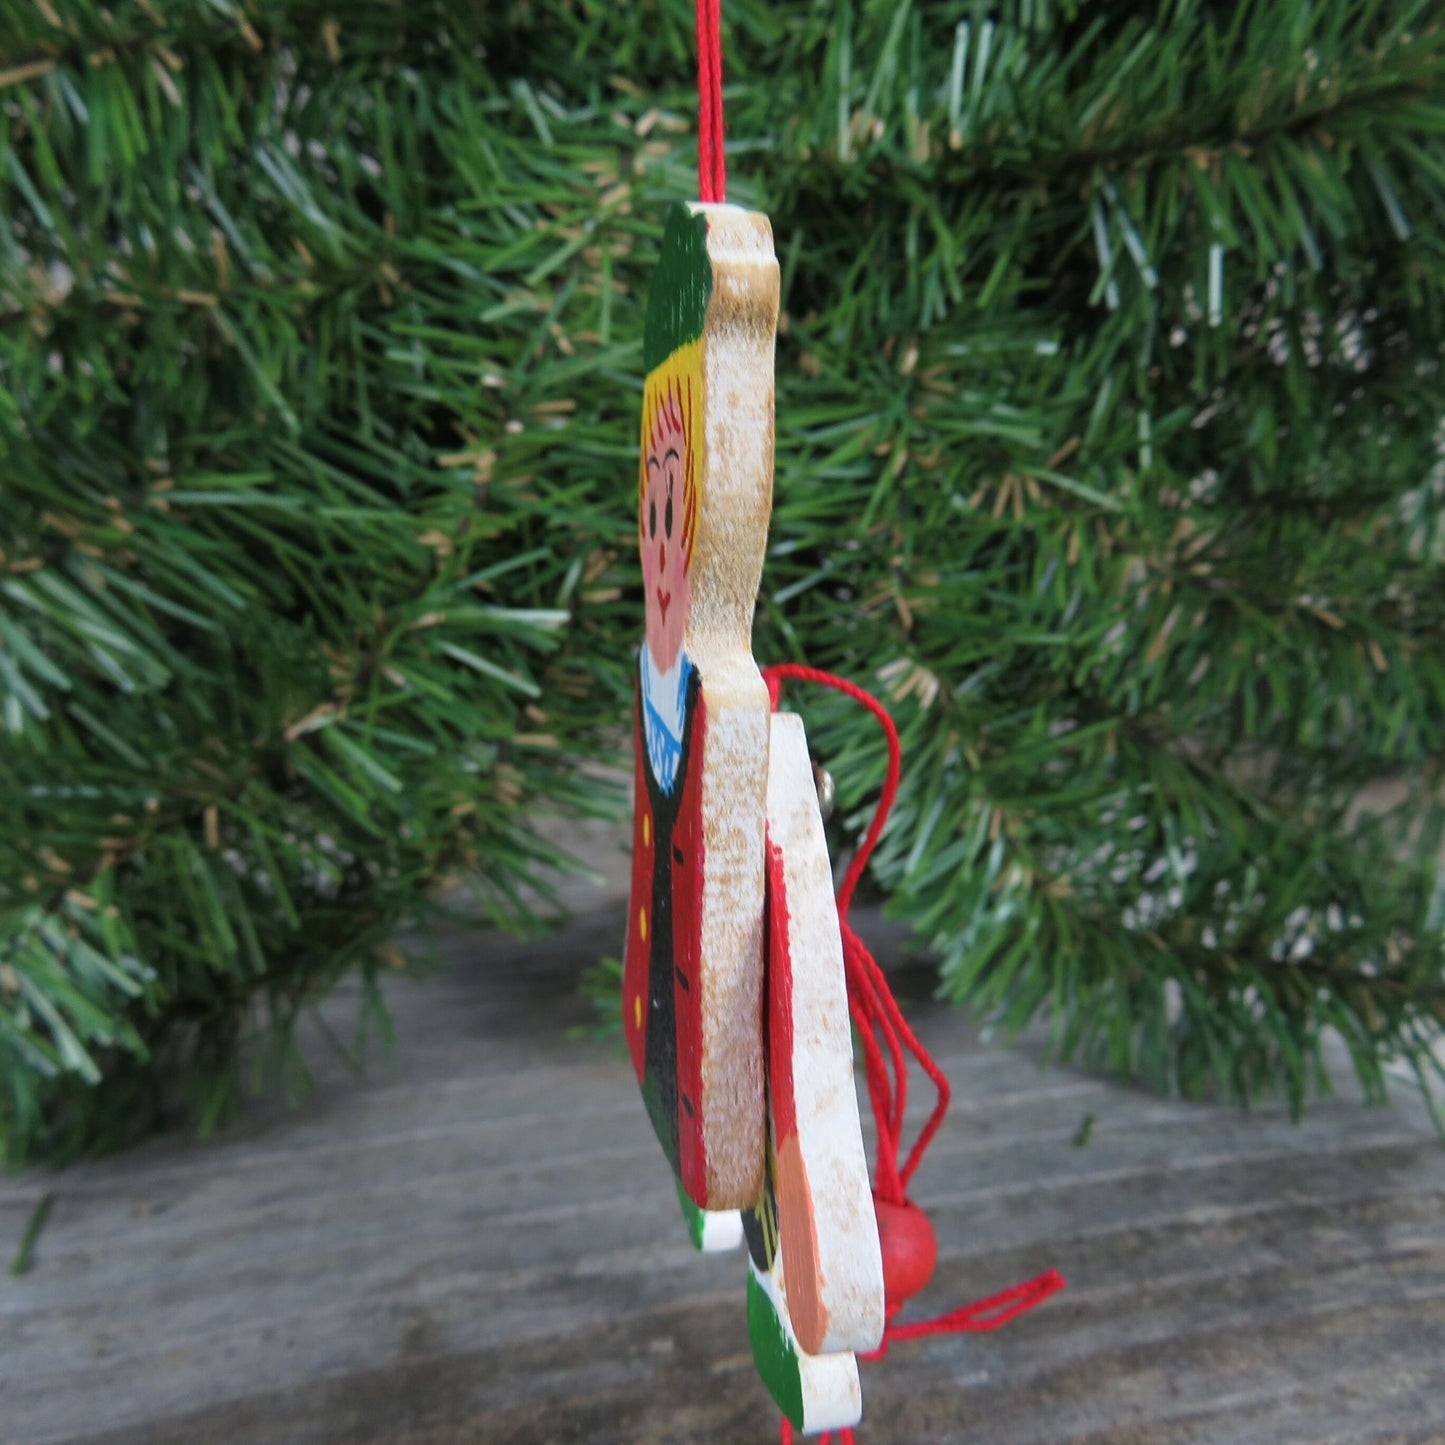 Vintage Boy Pull String Wood Ornament Wooden Jumping Toy Christmas Ornament